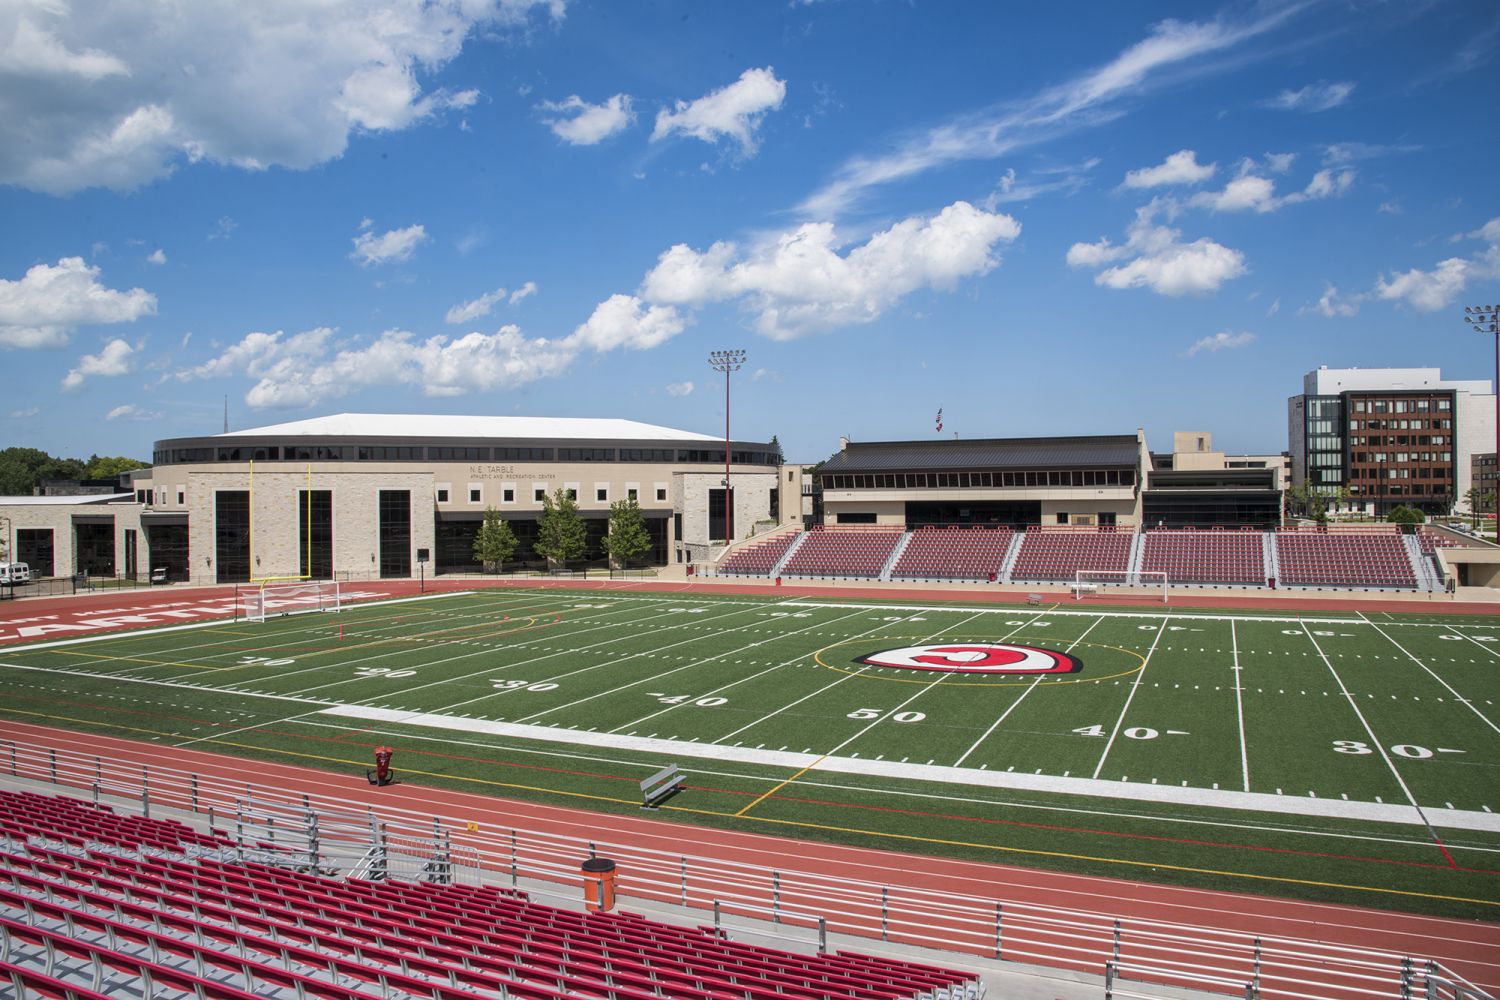 Art Keller Field, which is home to our football, soccer, lacrosse, and track & field teams, o...